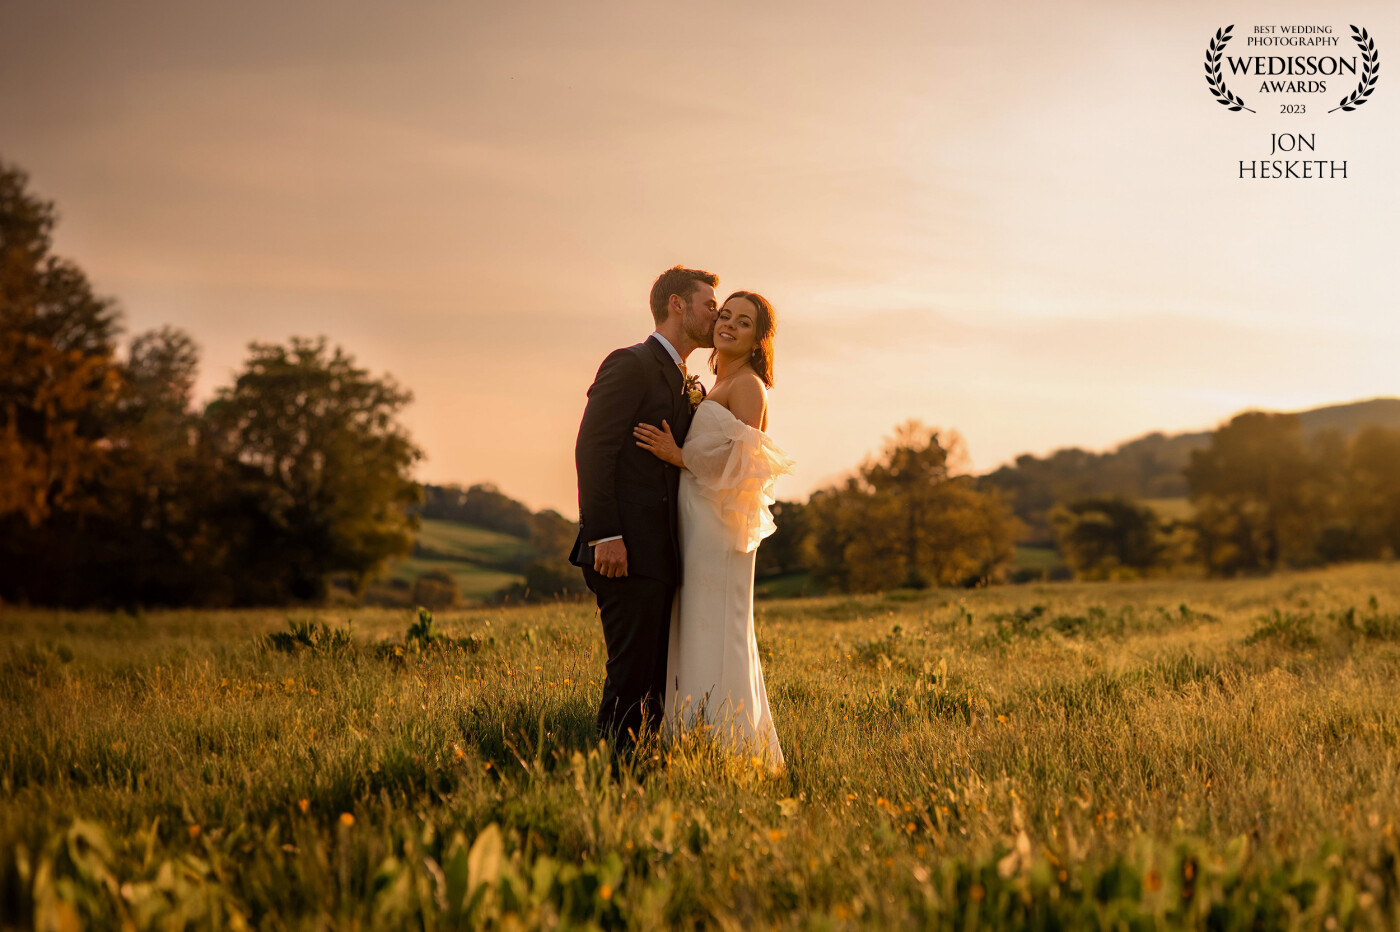 We were so lucky to have an amazing golden hour for Lucy and Jack’s weddings at the stunning Garthmyl Hall. This was a candid moment caught between portraits, just lovely.